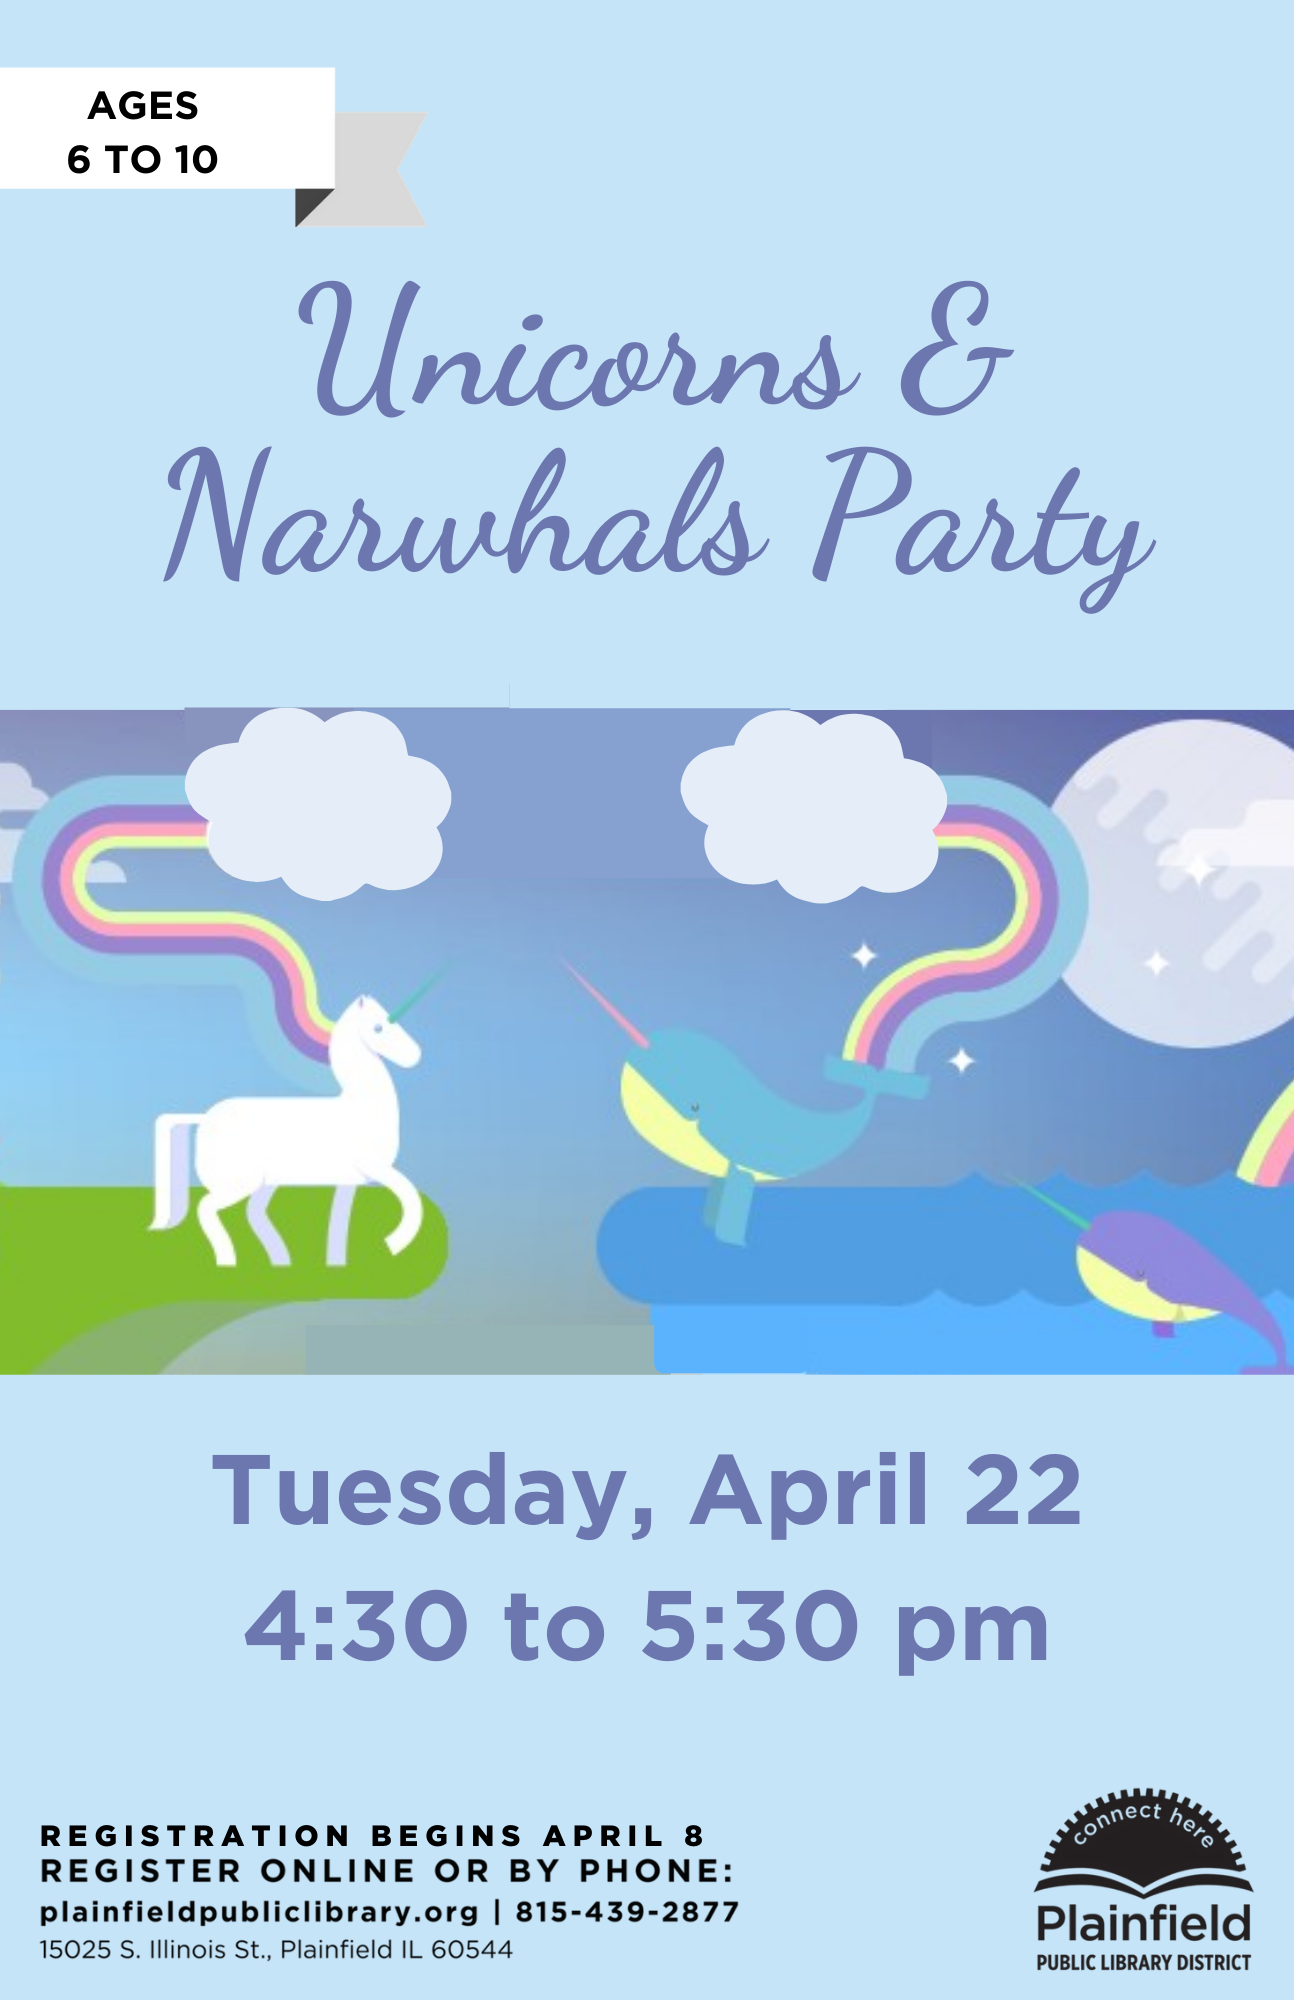 Unicorns & Narwals Party